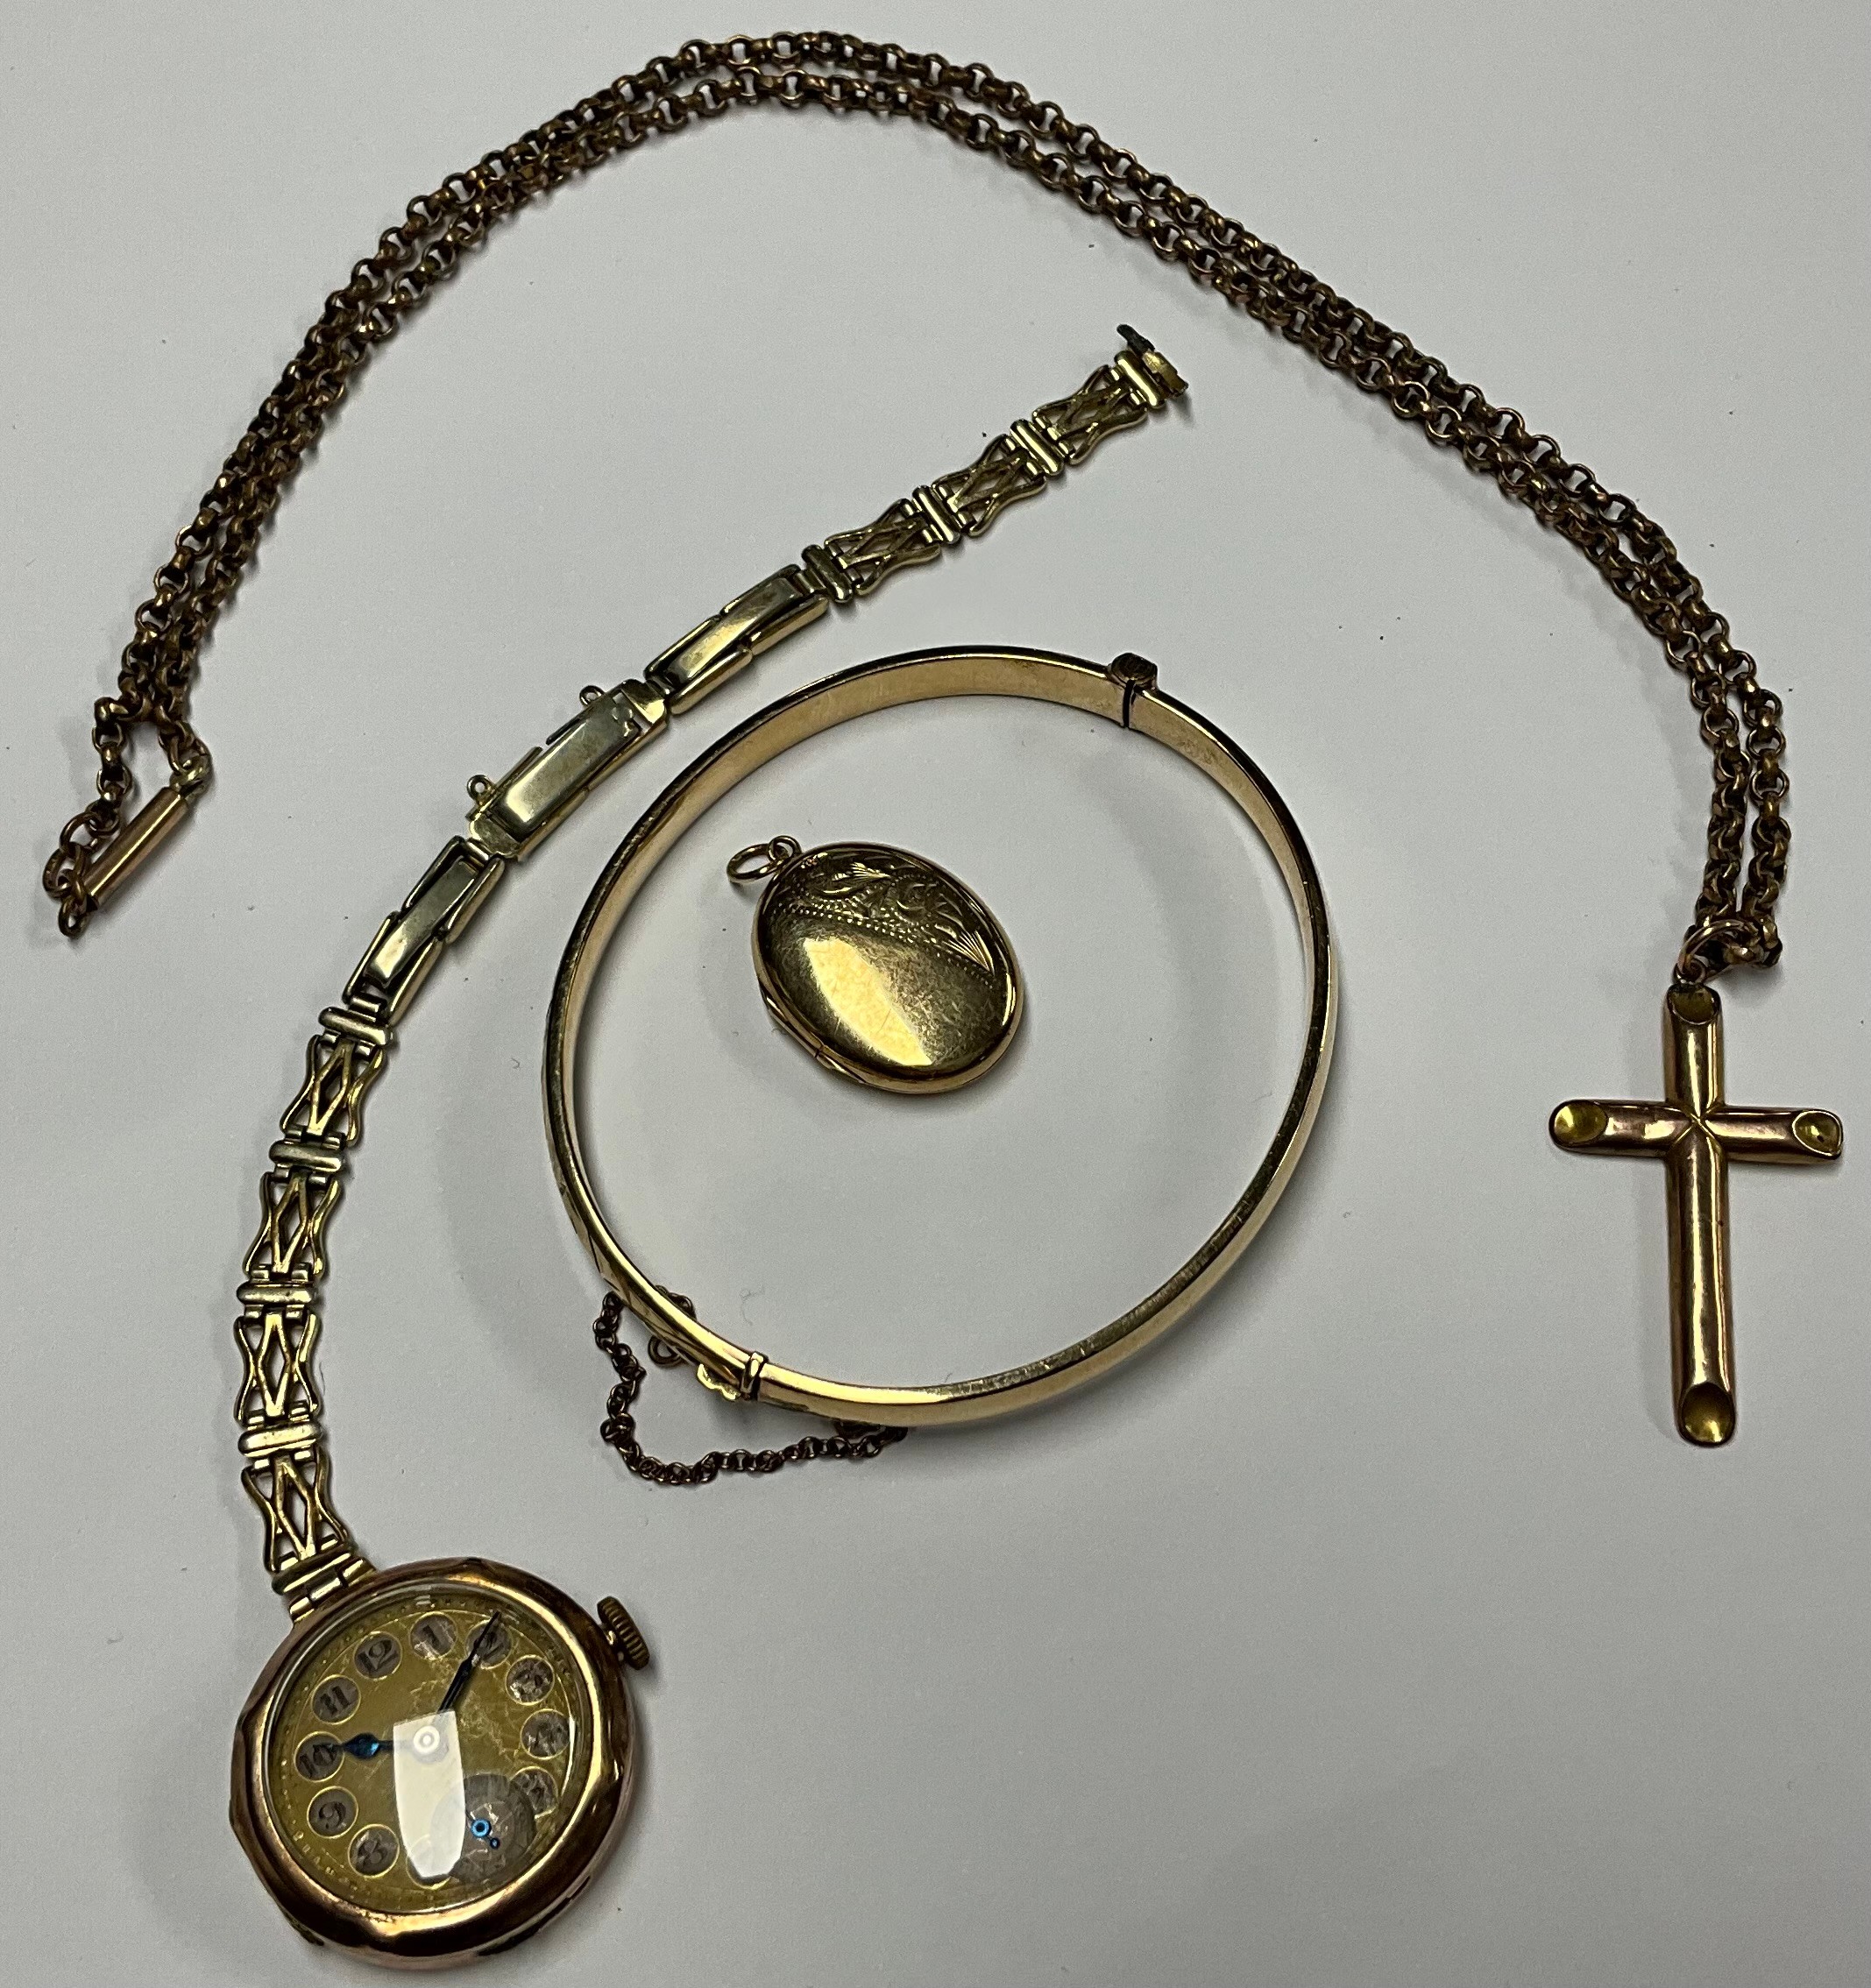 A 9ct rose gold cross pendant, marked 375, suspended from a 19th century gold plated guard chain